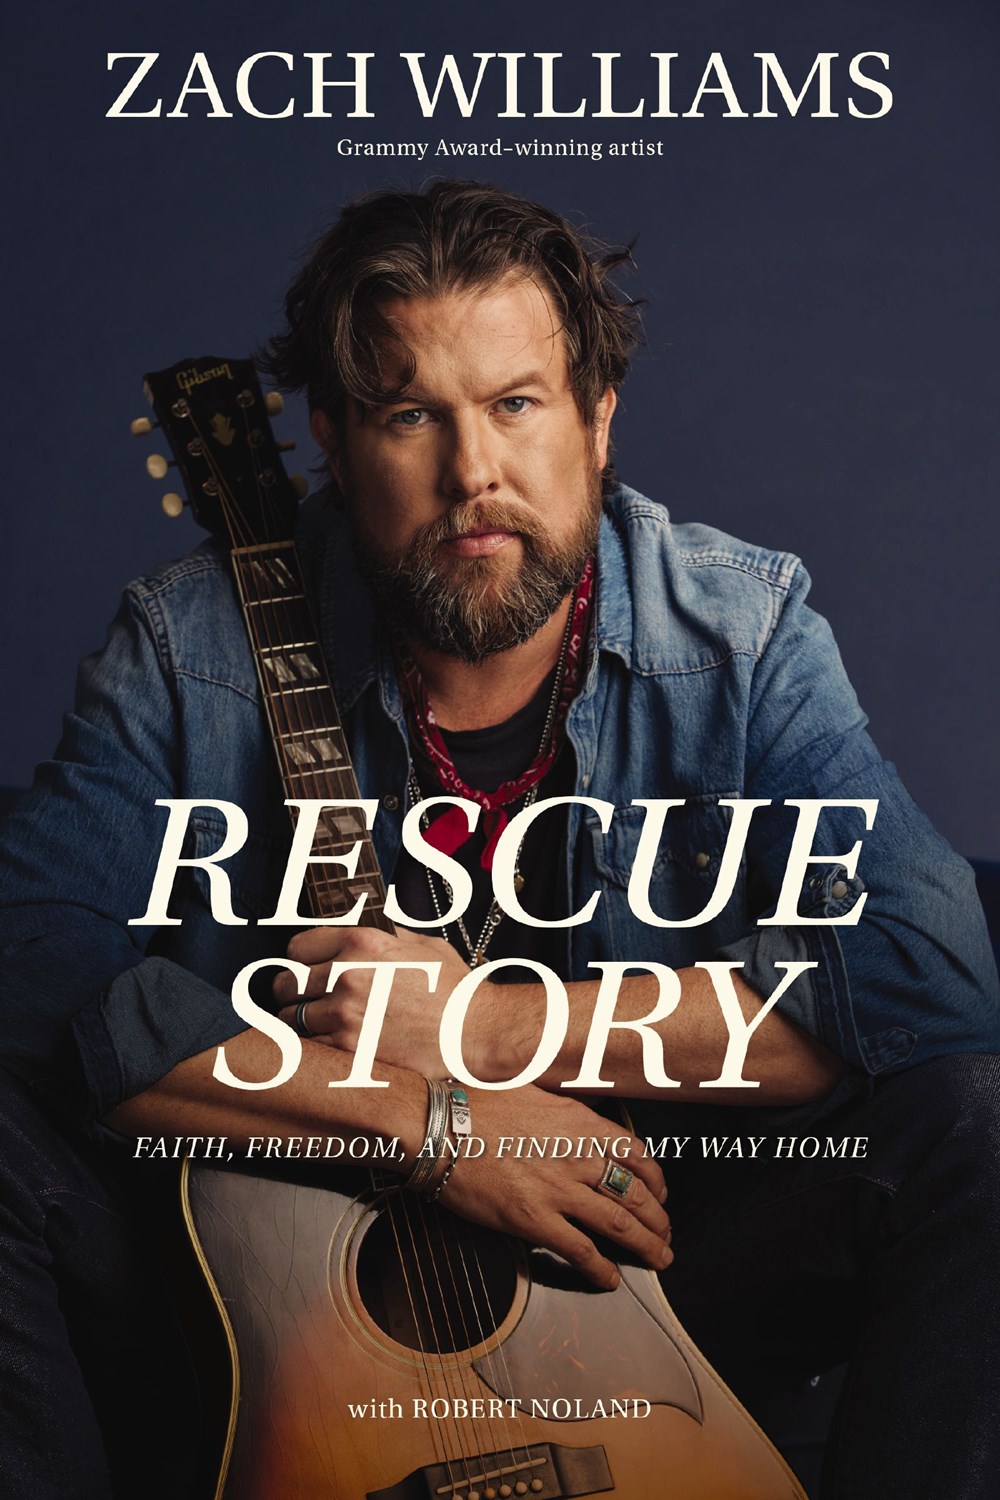 The cover of Christian musical artist Zach Williams book Rescue Story